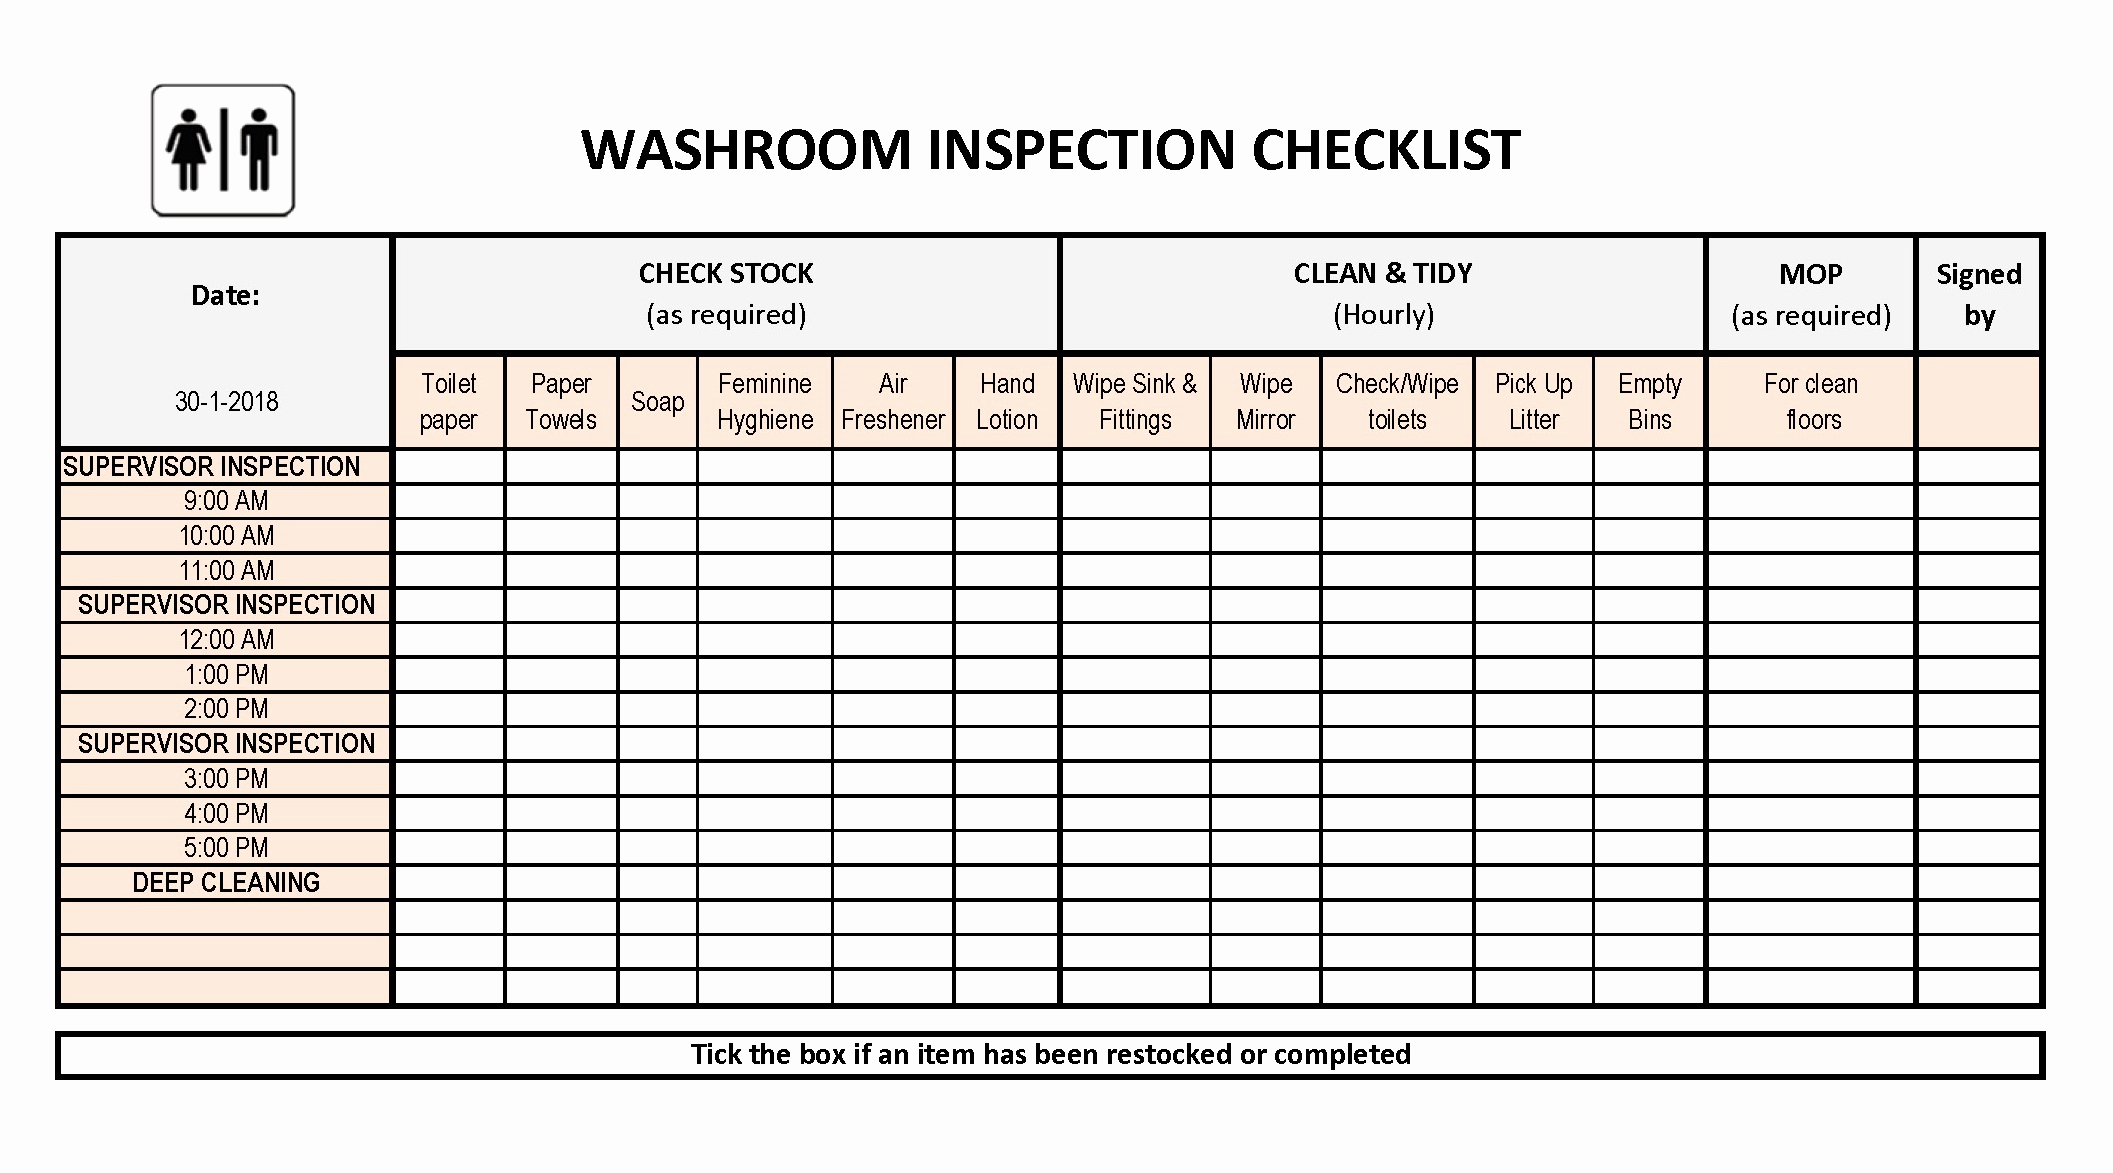 Bathroom Cleaning Schedule Template Fresh Restroom Cleaning Checklist How to Make A Restroom